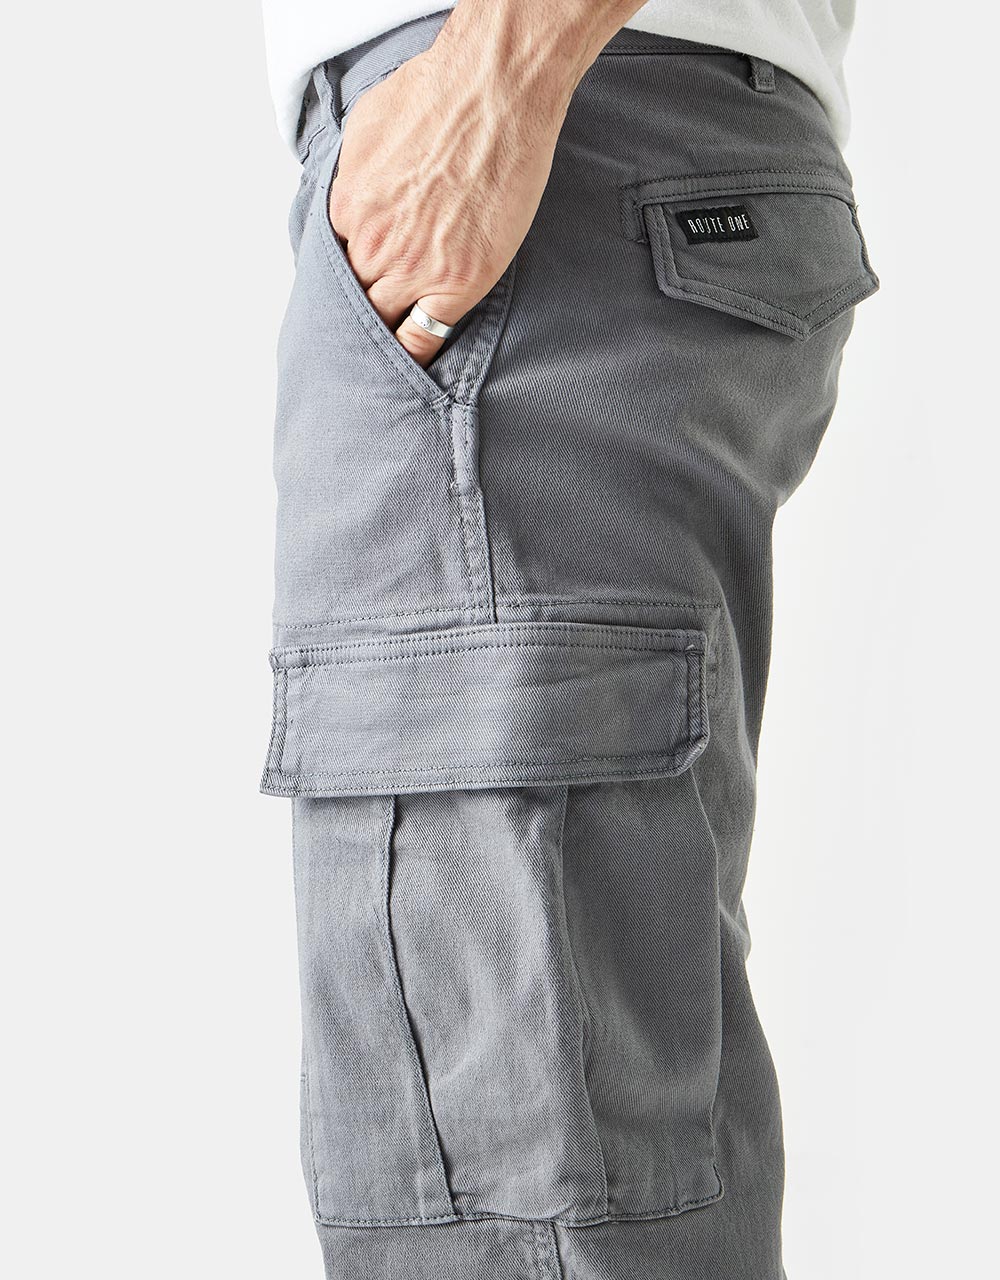 Route One Classic Cargo Pants - Charcoal